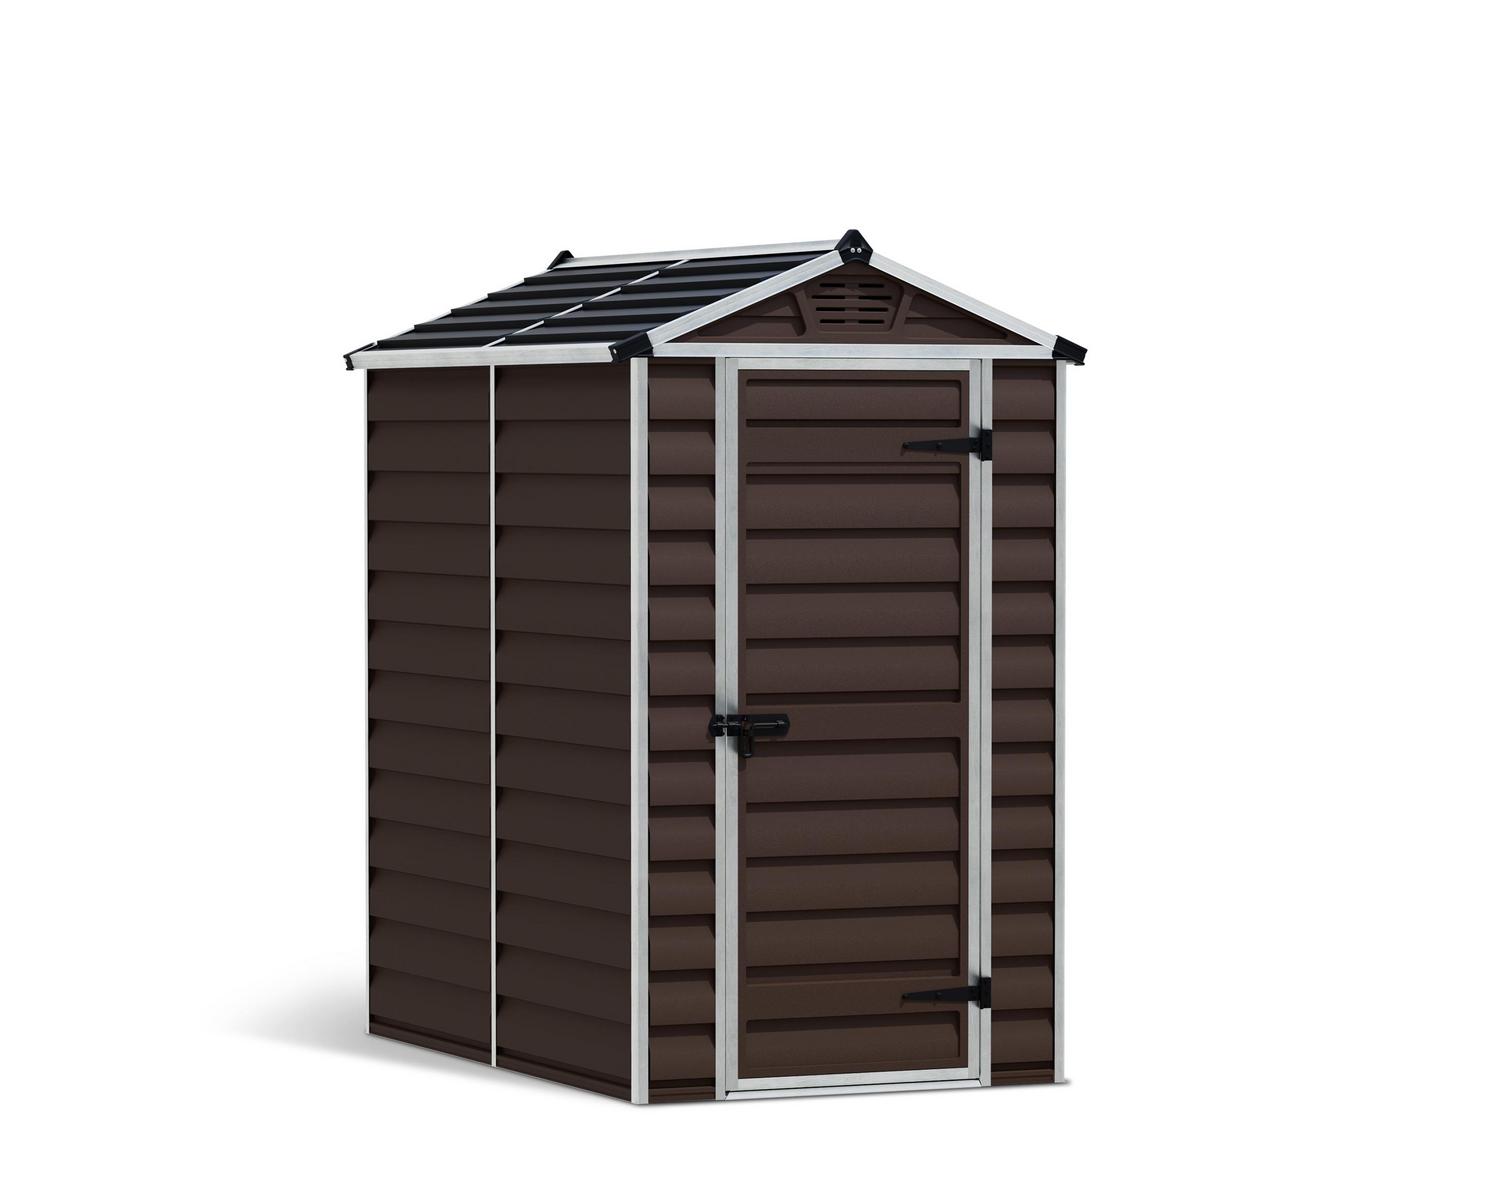 Skylight 4 ft. x 6 ft. Plastic Garden Storage Shed with Brown Polycarbonate Walls &amp; Aluminium Frame